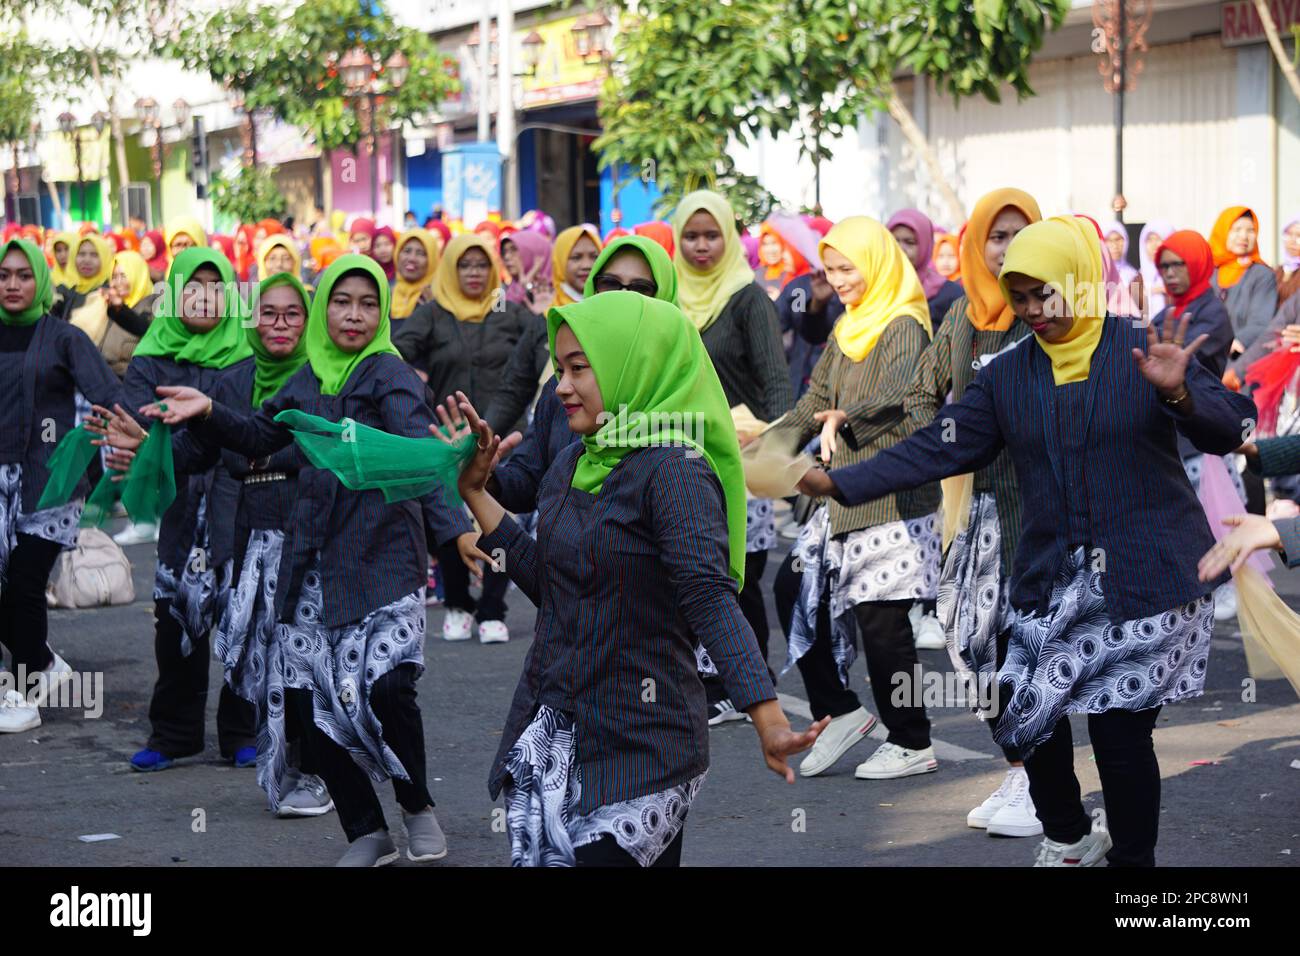 Indonesian do flash mob traditional dance to celebrate national education day Stock Photo